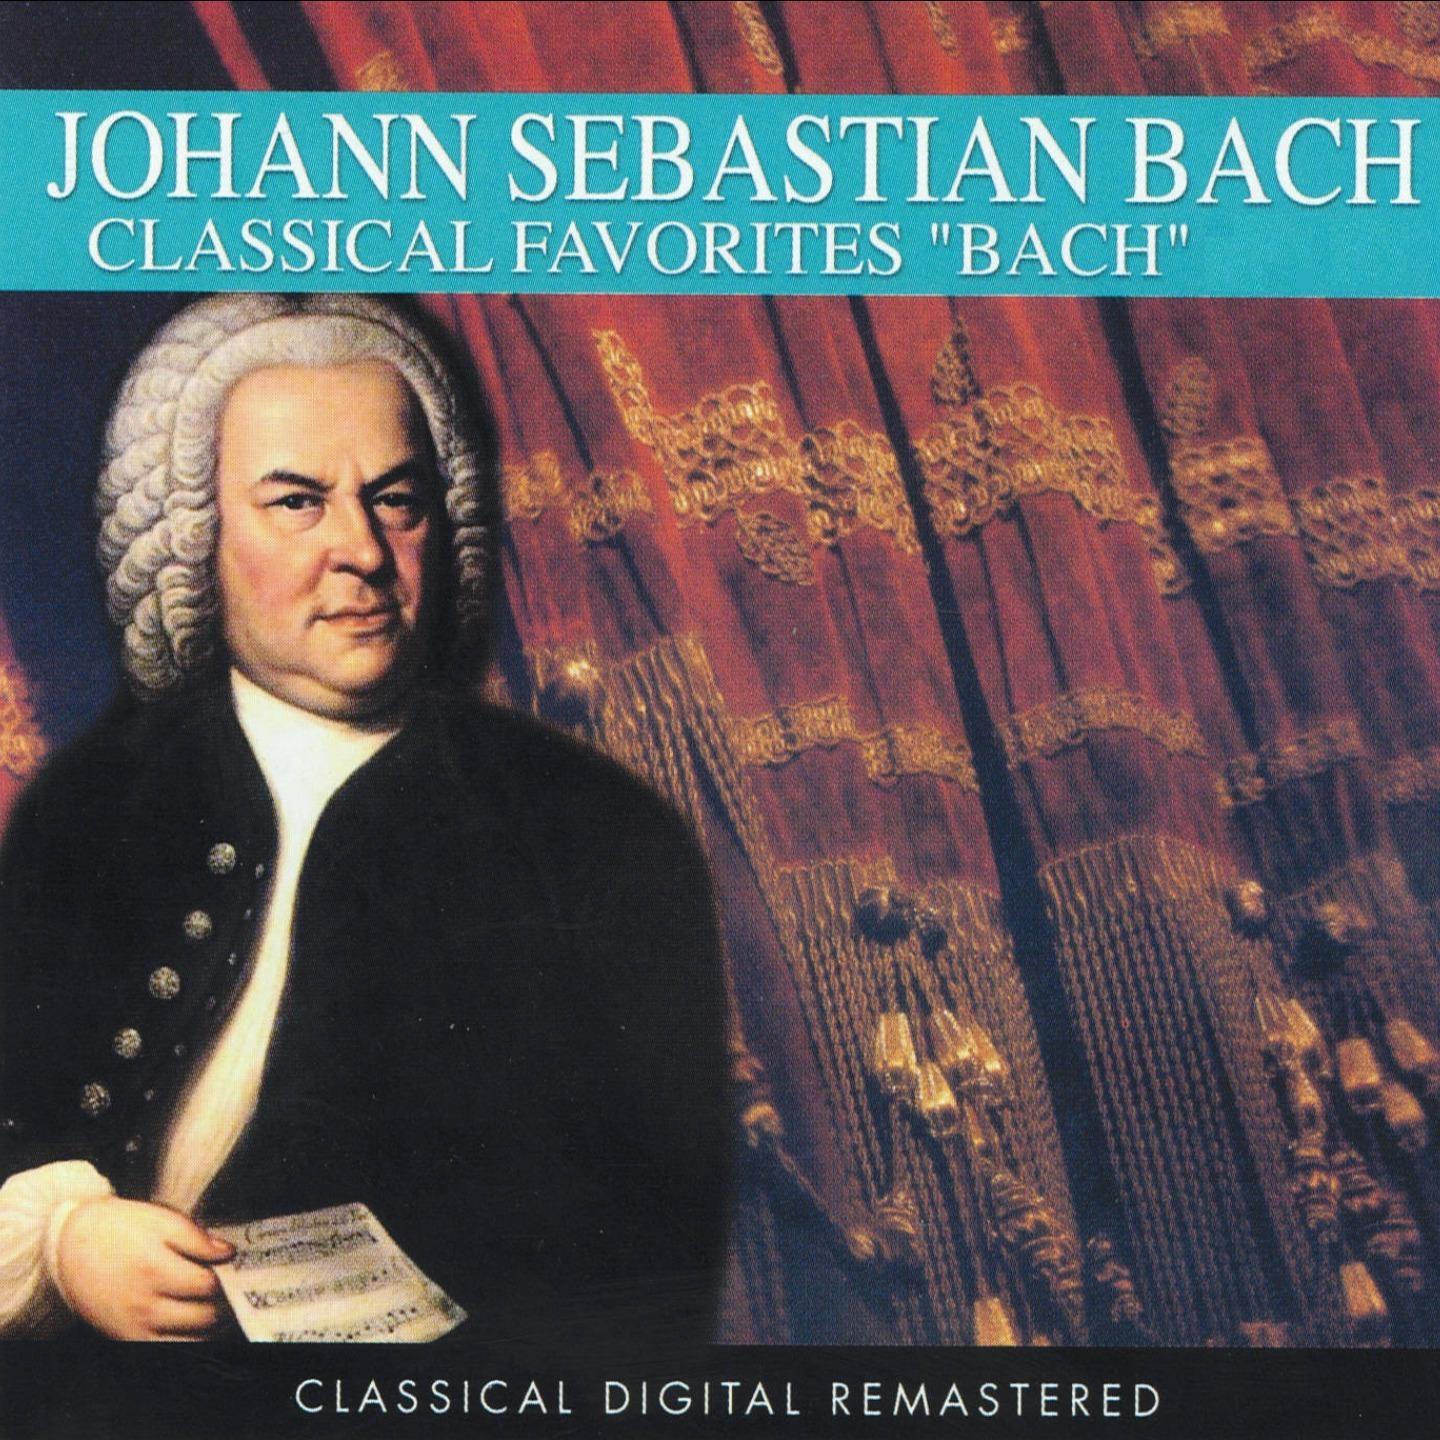 Suite for Orchestra No. 2, in B Minor, BWV 1067: Menuet